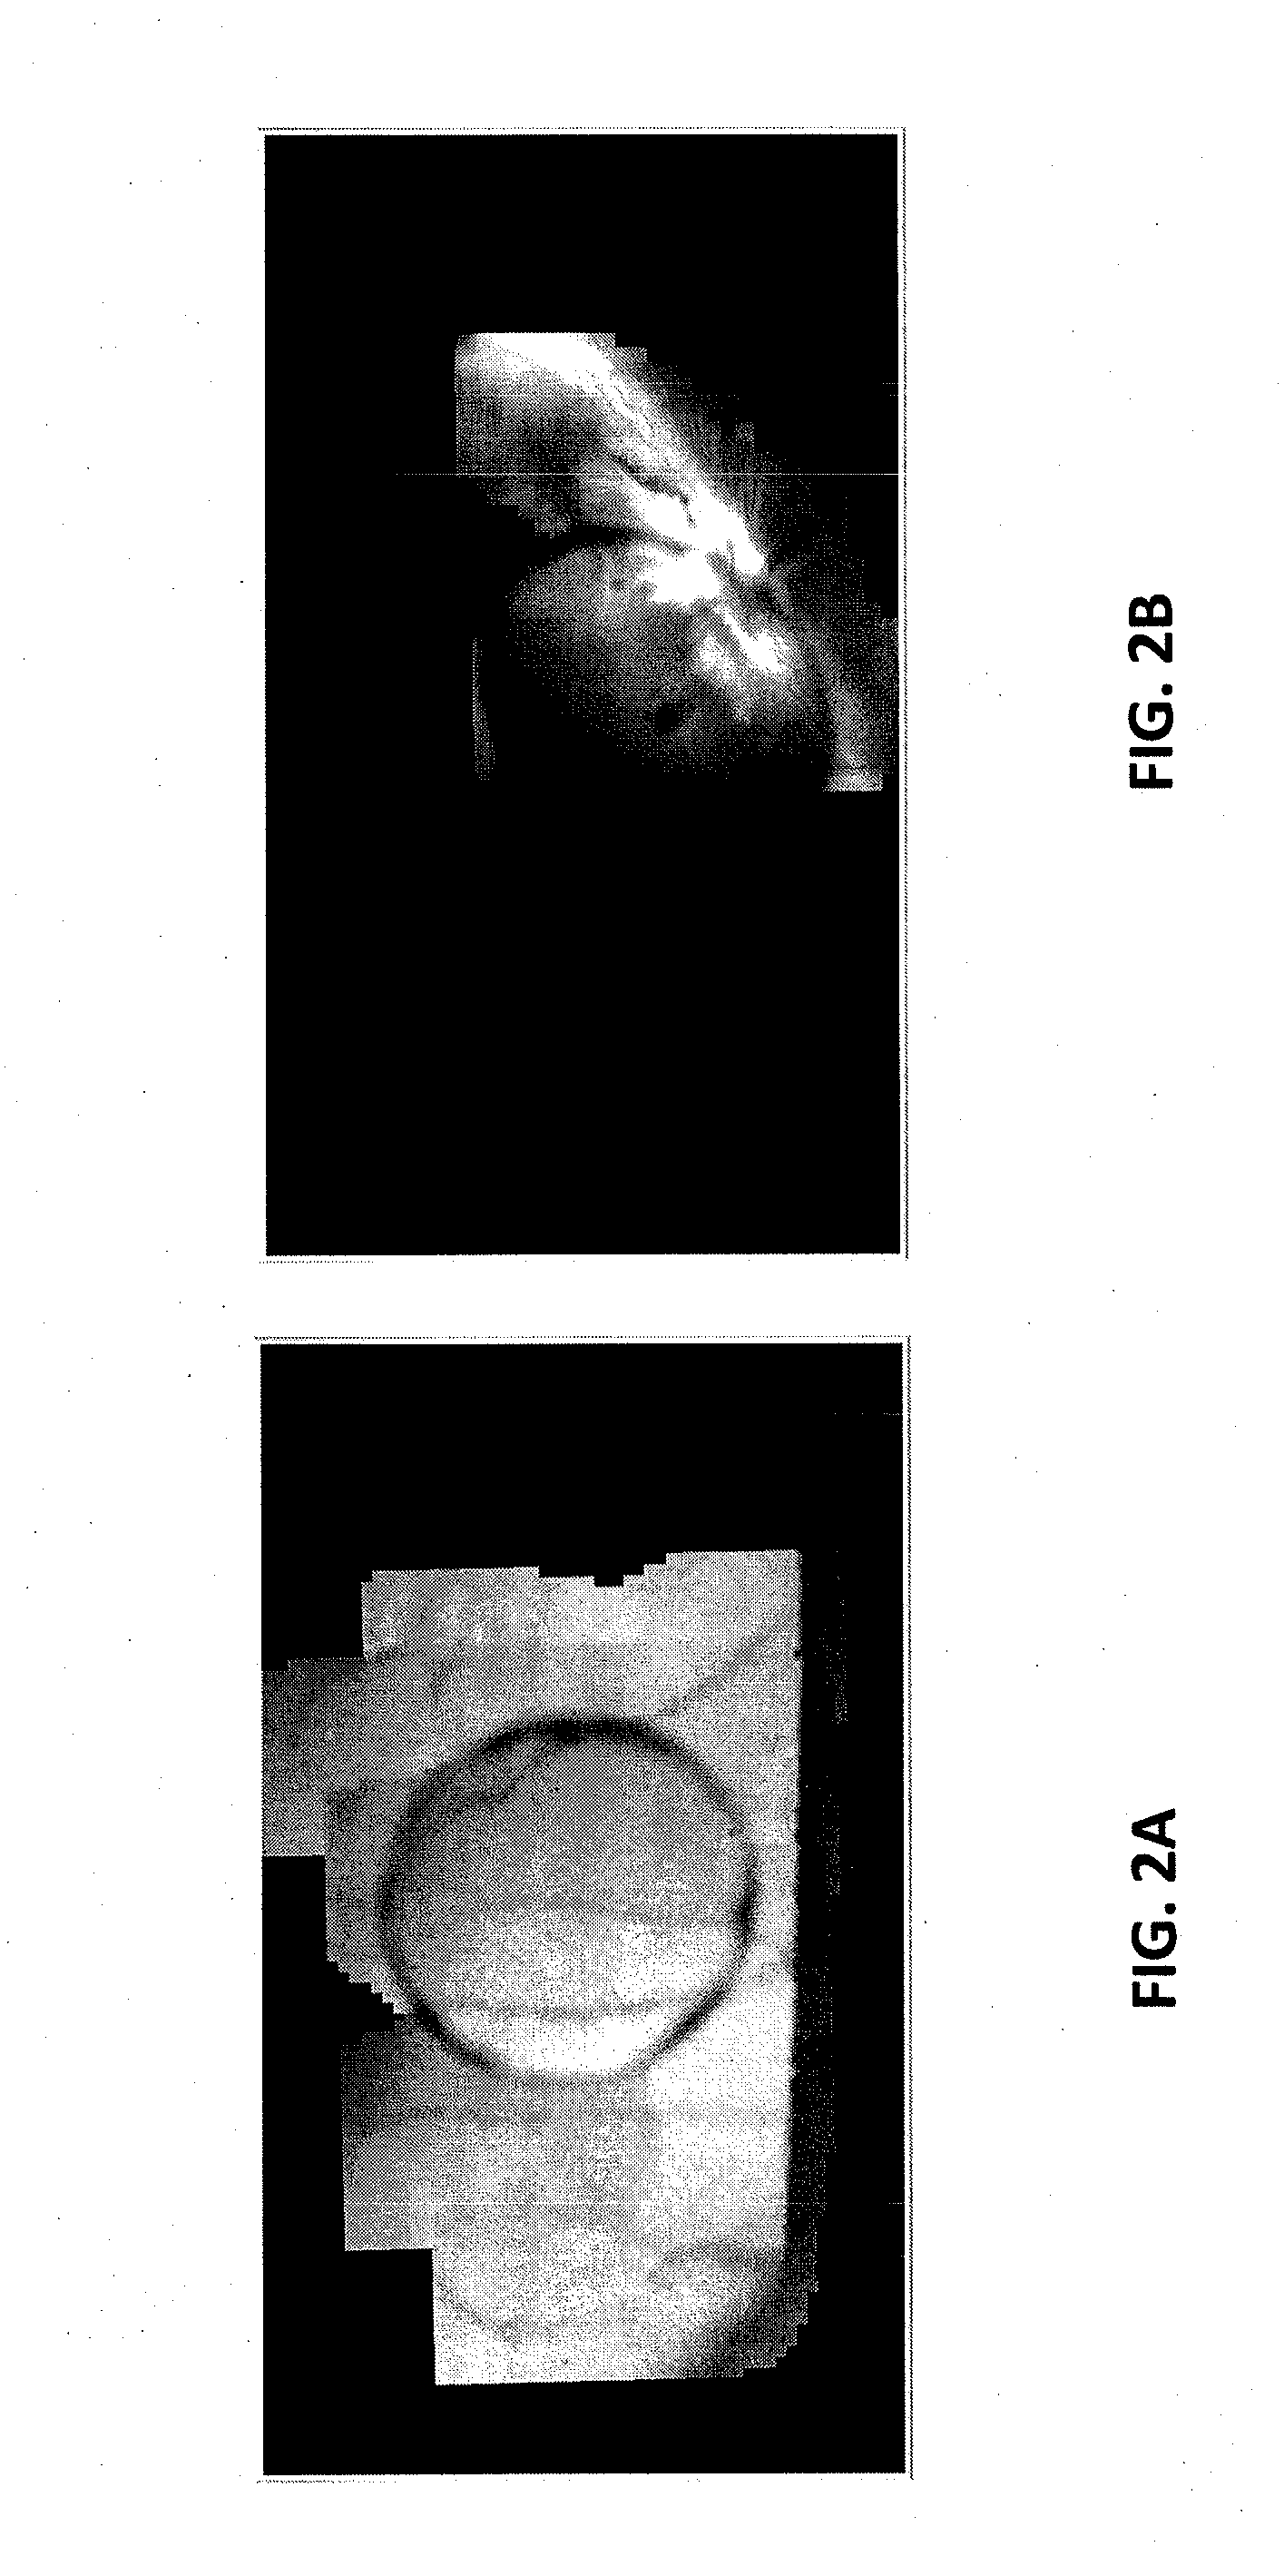 Augmented field of view imaging system